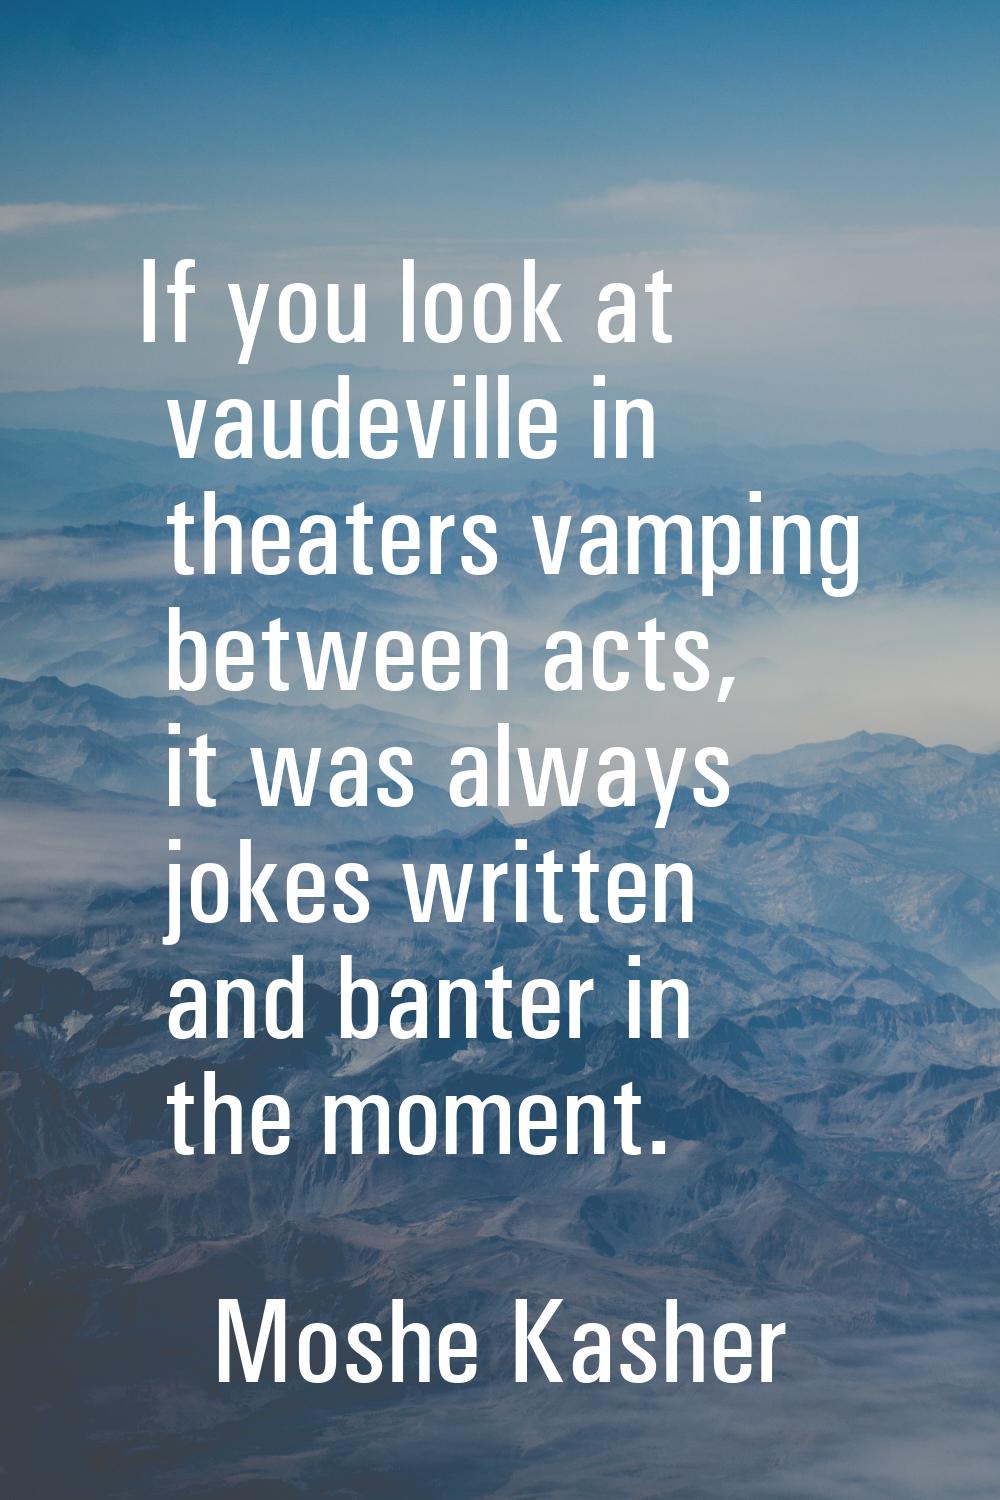 If you look at vaudeville in theaters vamping between acts, it was always jokes written and banter 